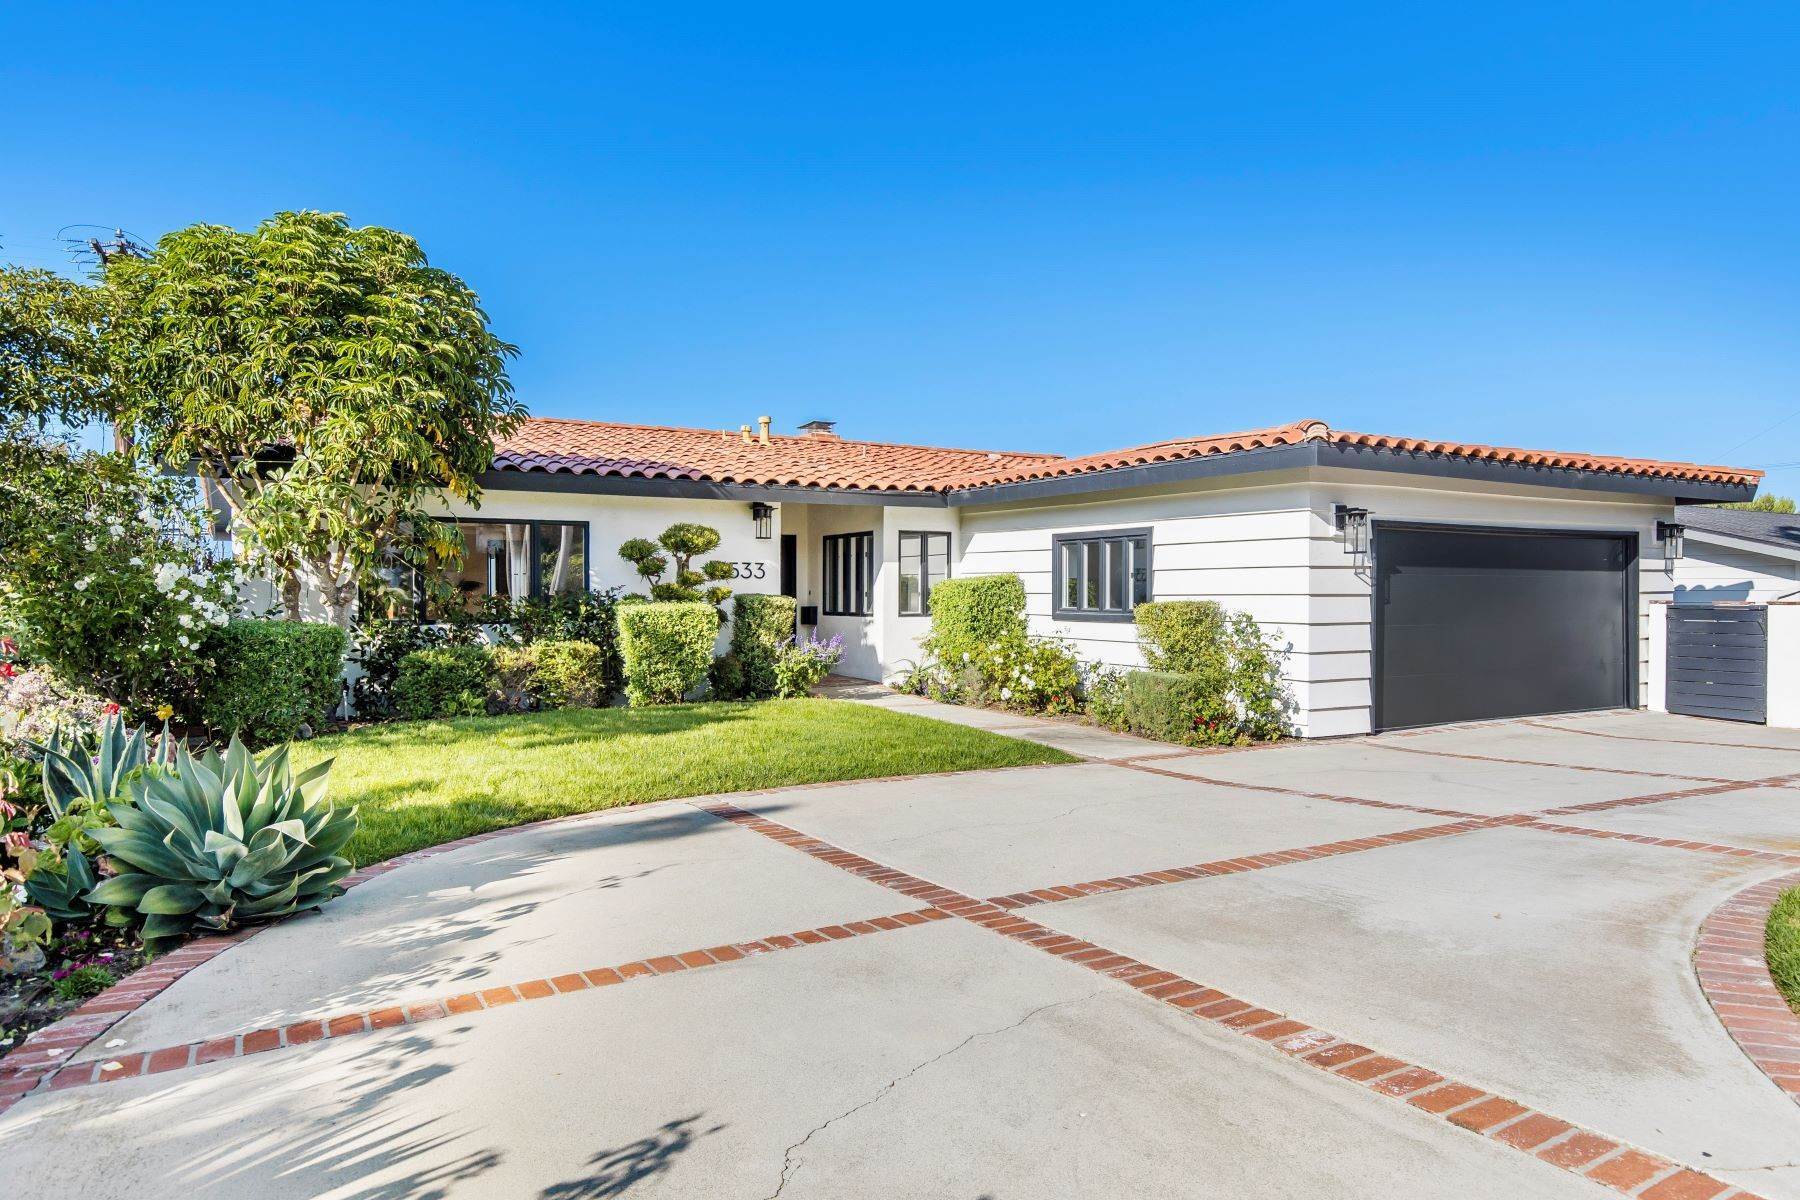 Single Family Homes for Sale at 533 Paseo de las Estrellas, Redondo Beach, CA 90277 533 Paseo de las Estrellas Redondo Beach, California 90277 United States